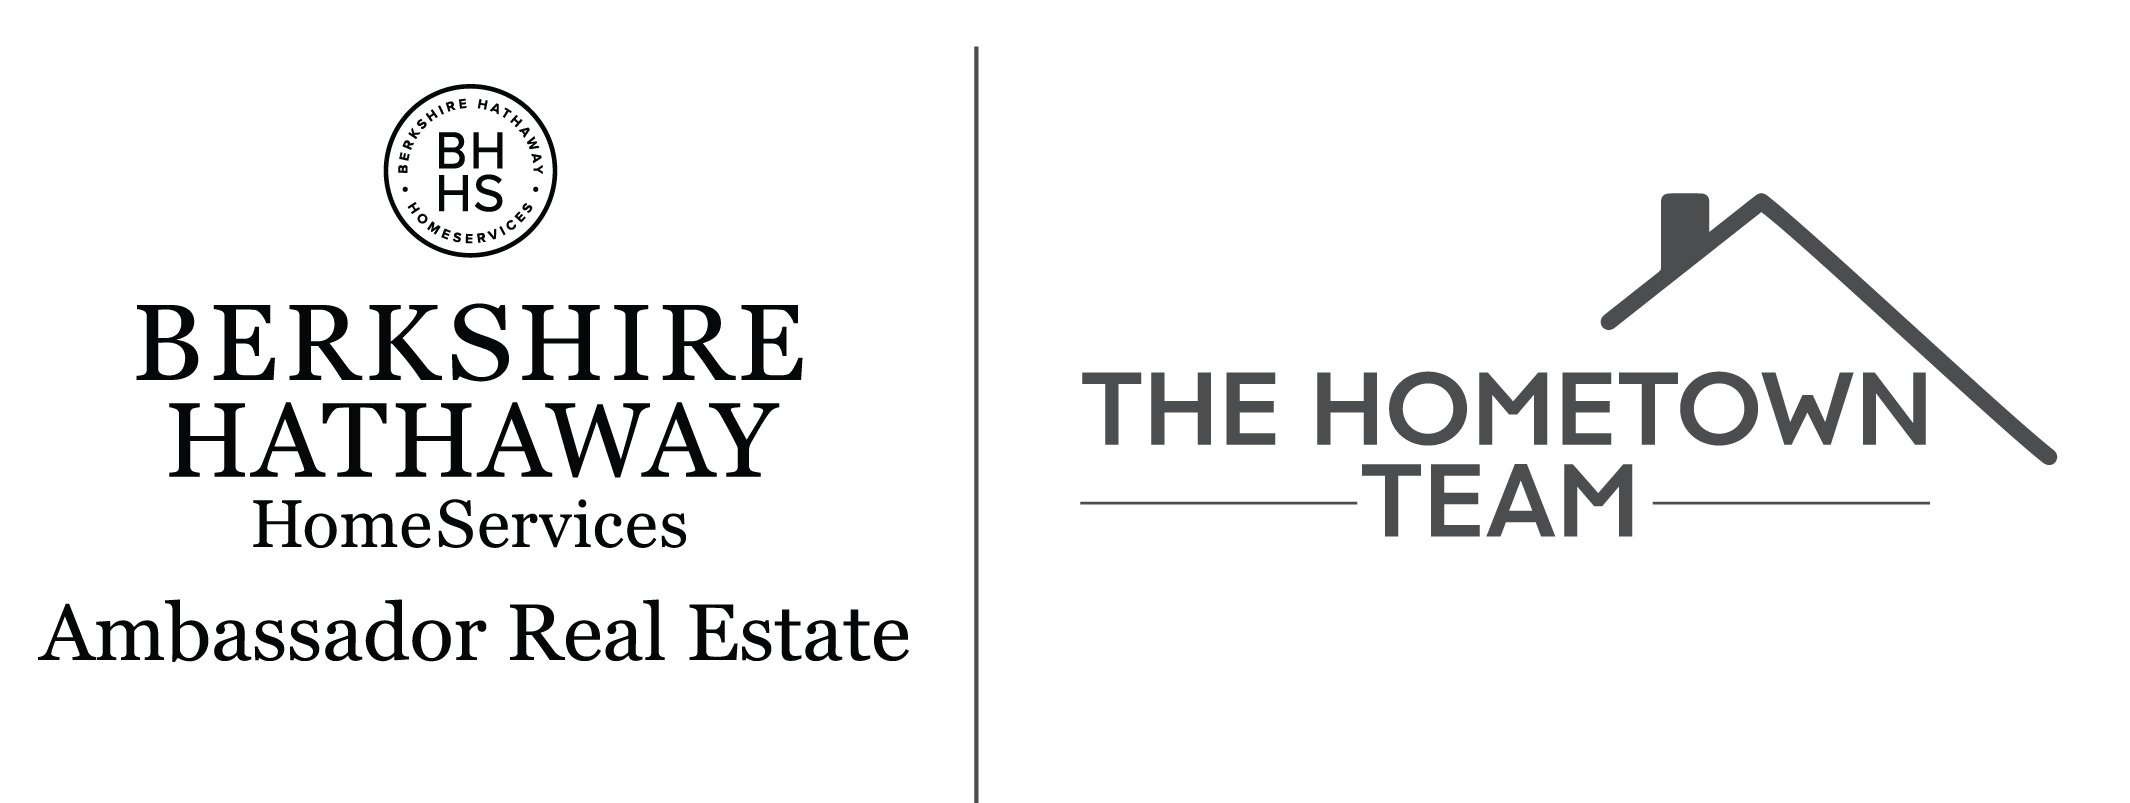 berkshire hathaway homeservices ambassador real estate and the hometown team logo